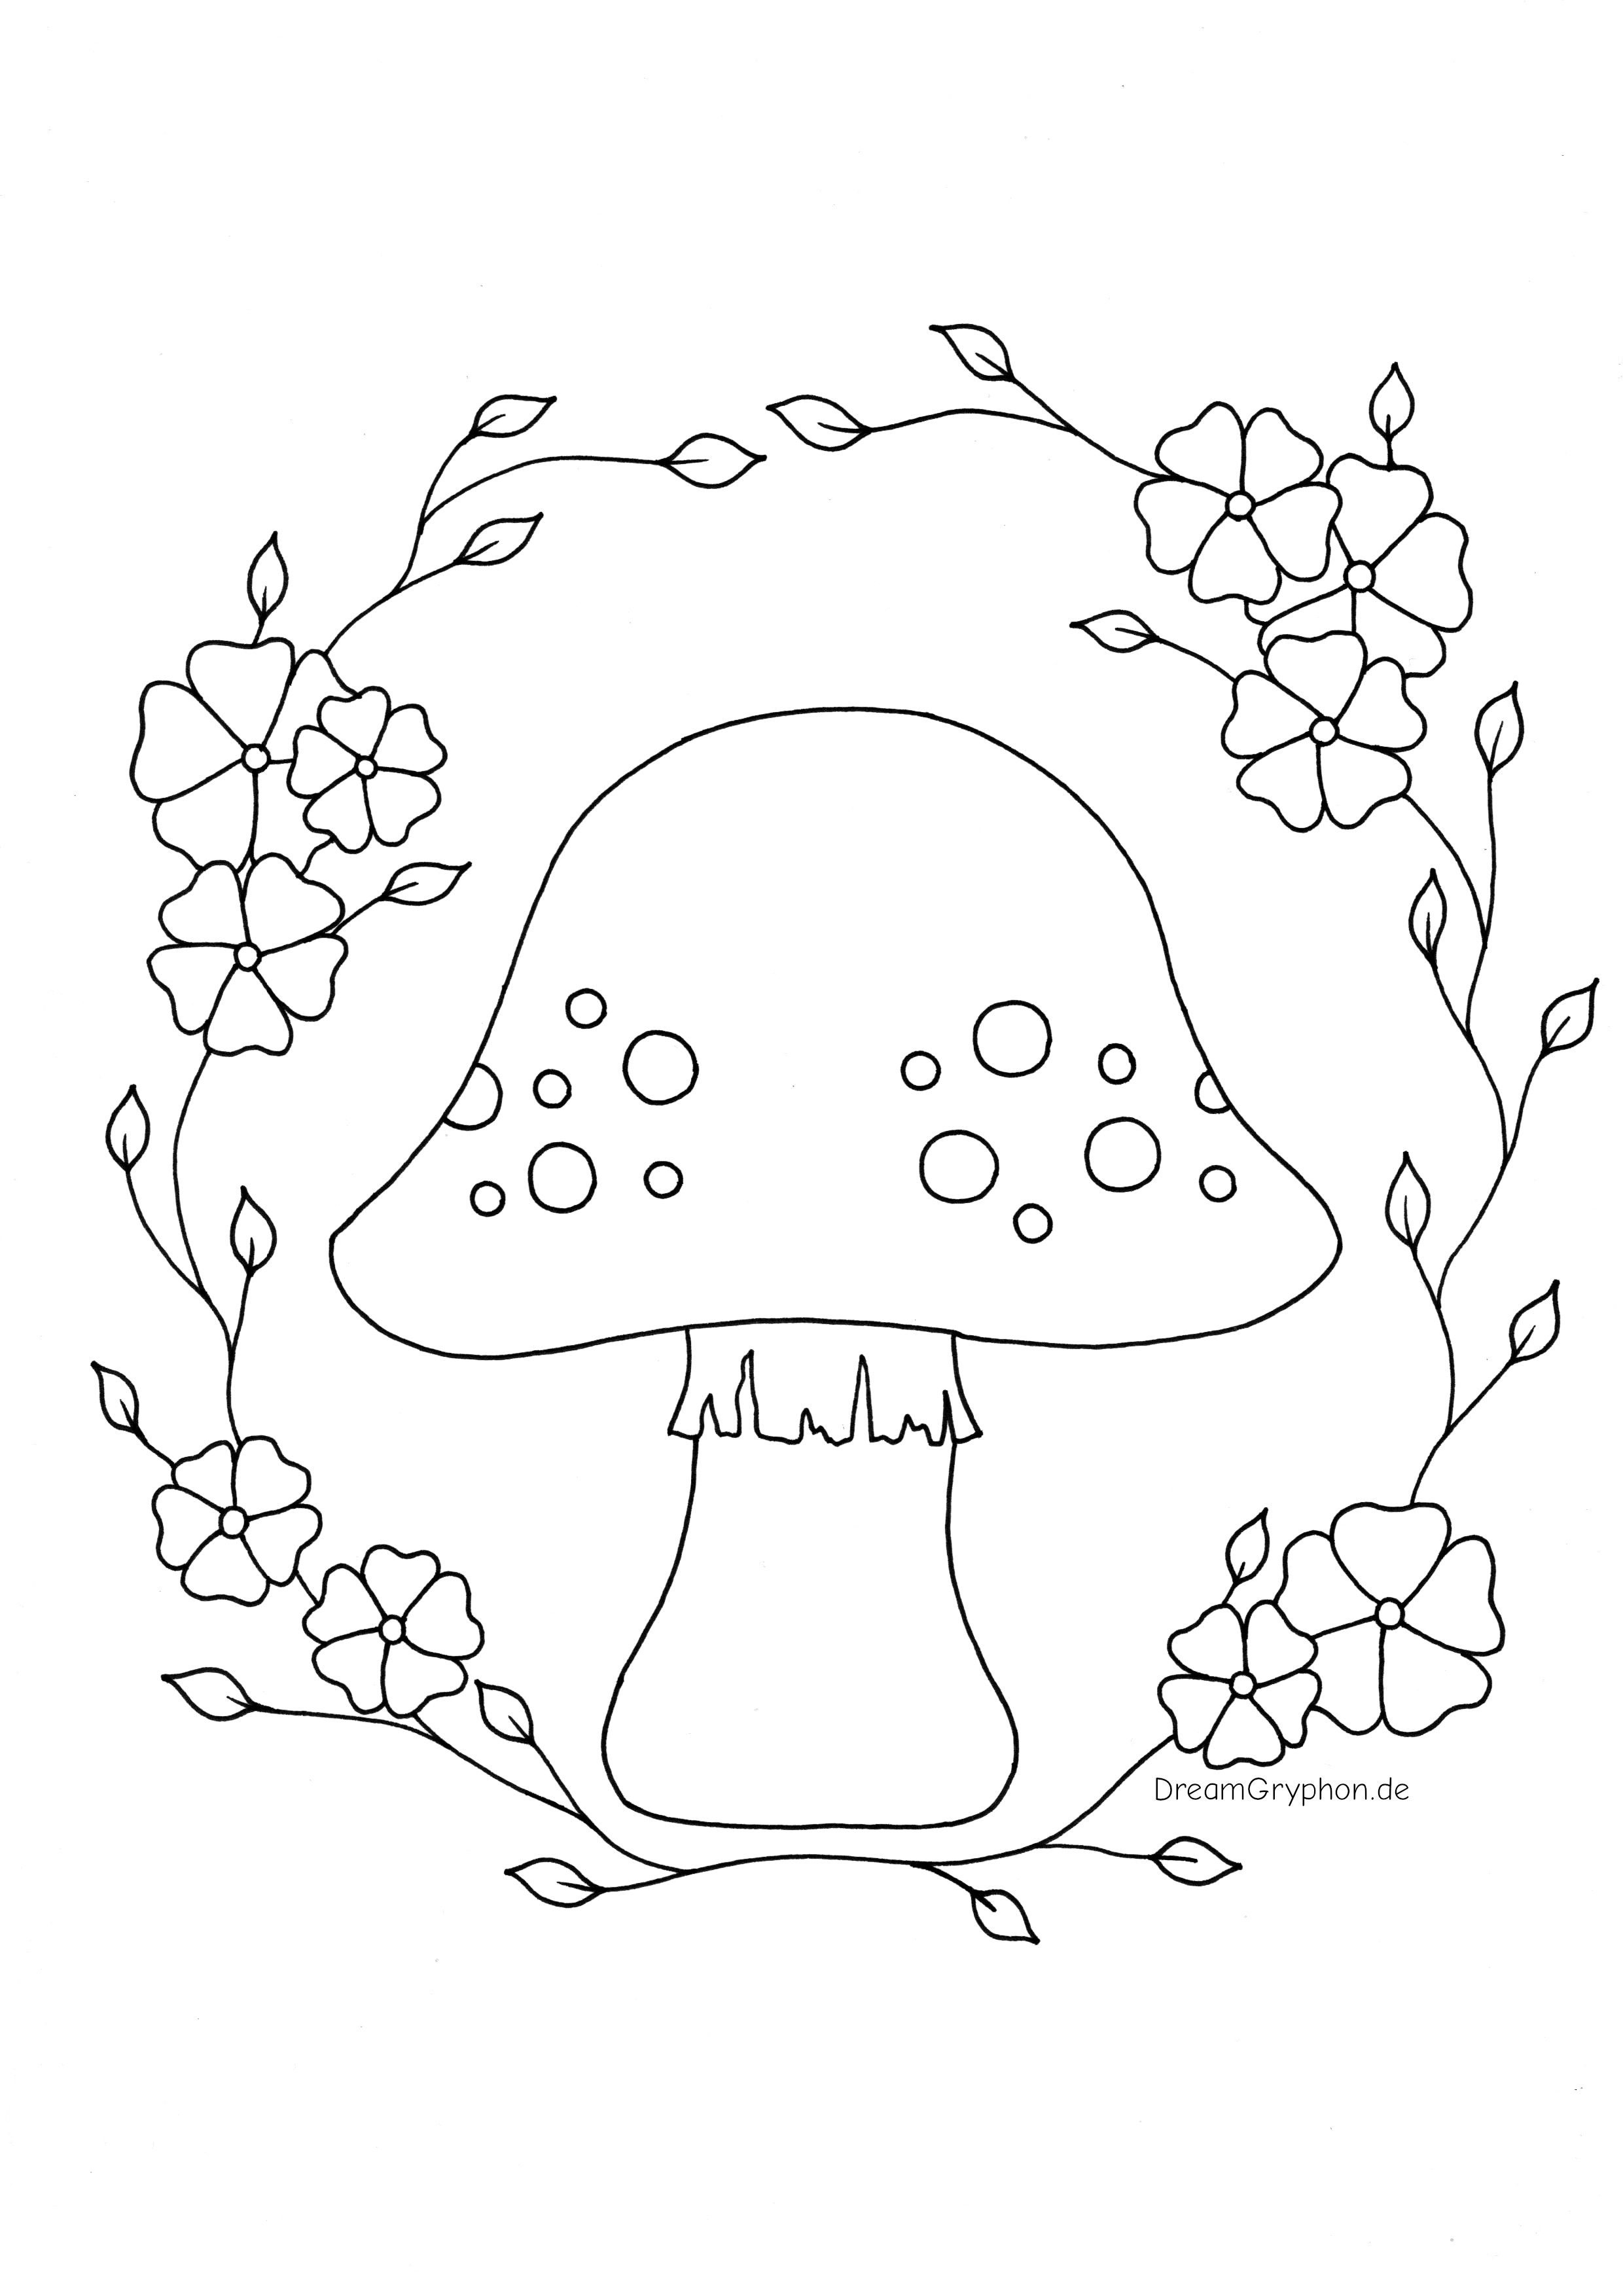 Coloring Page: Mushroom surrounded by leaves and blossoms.